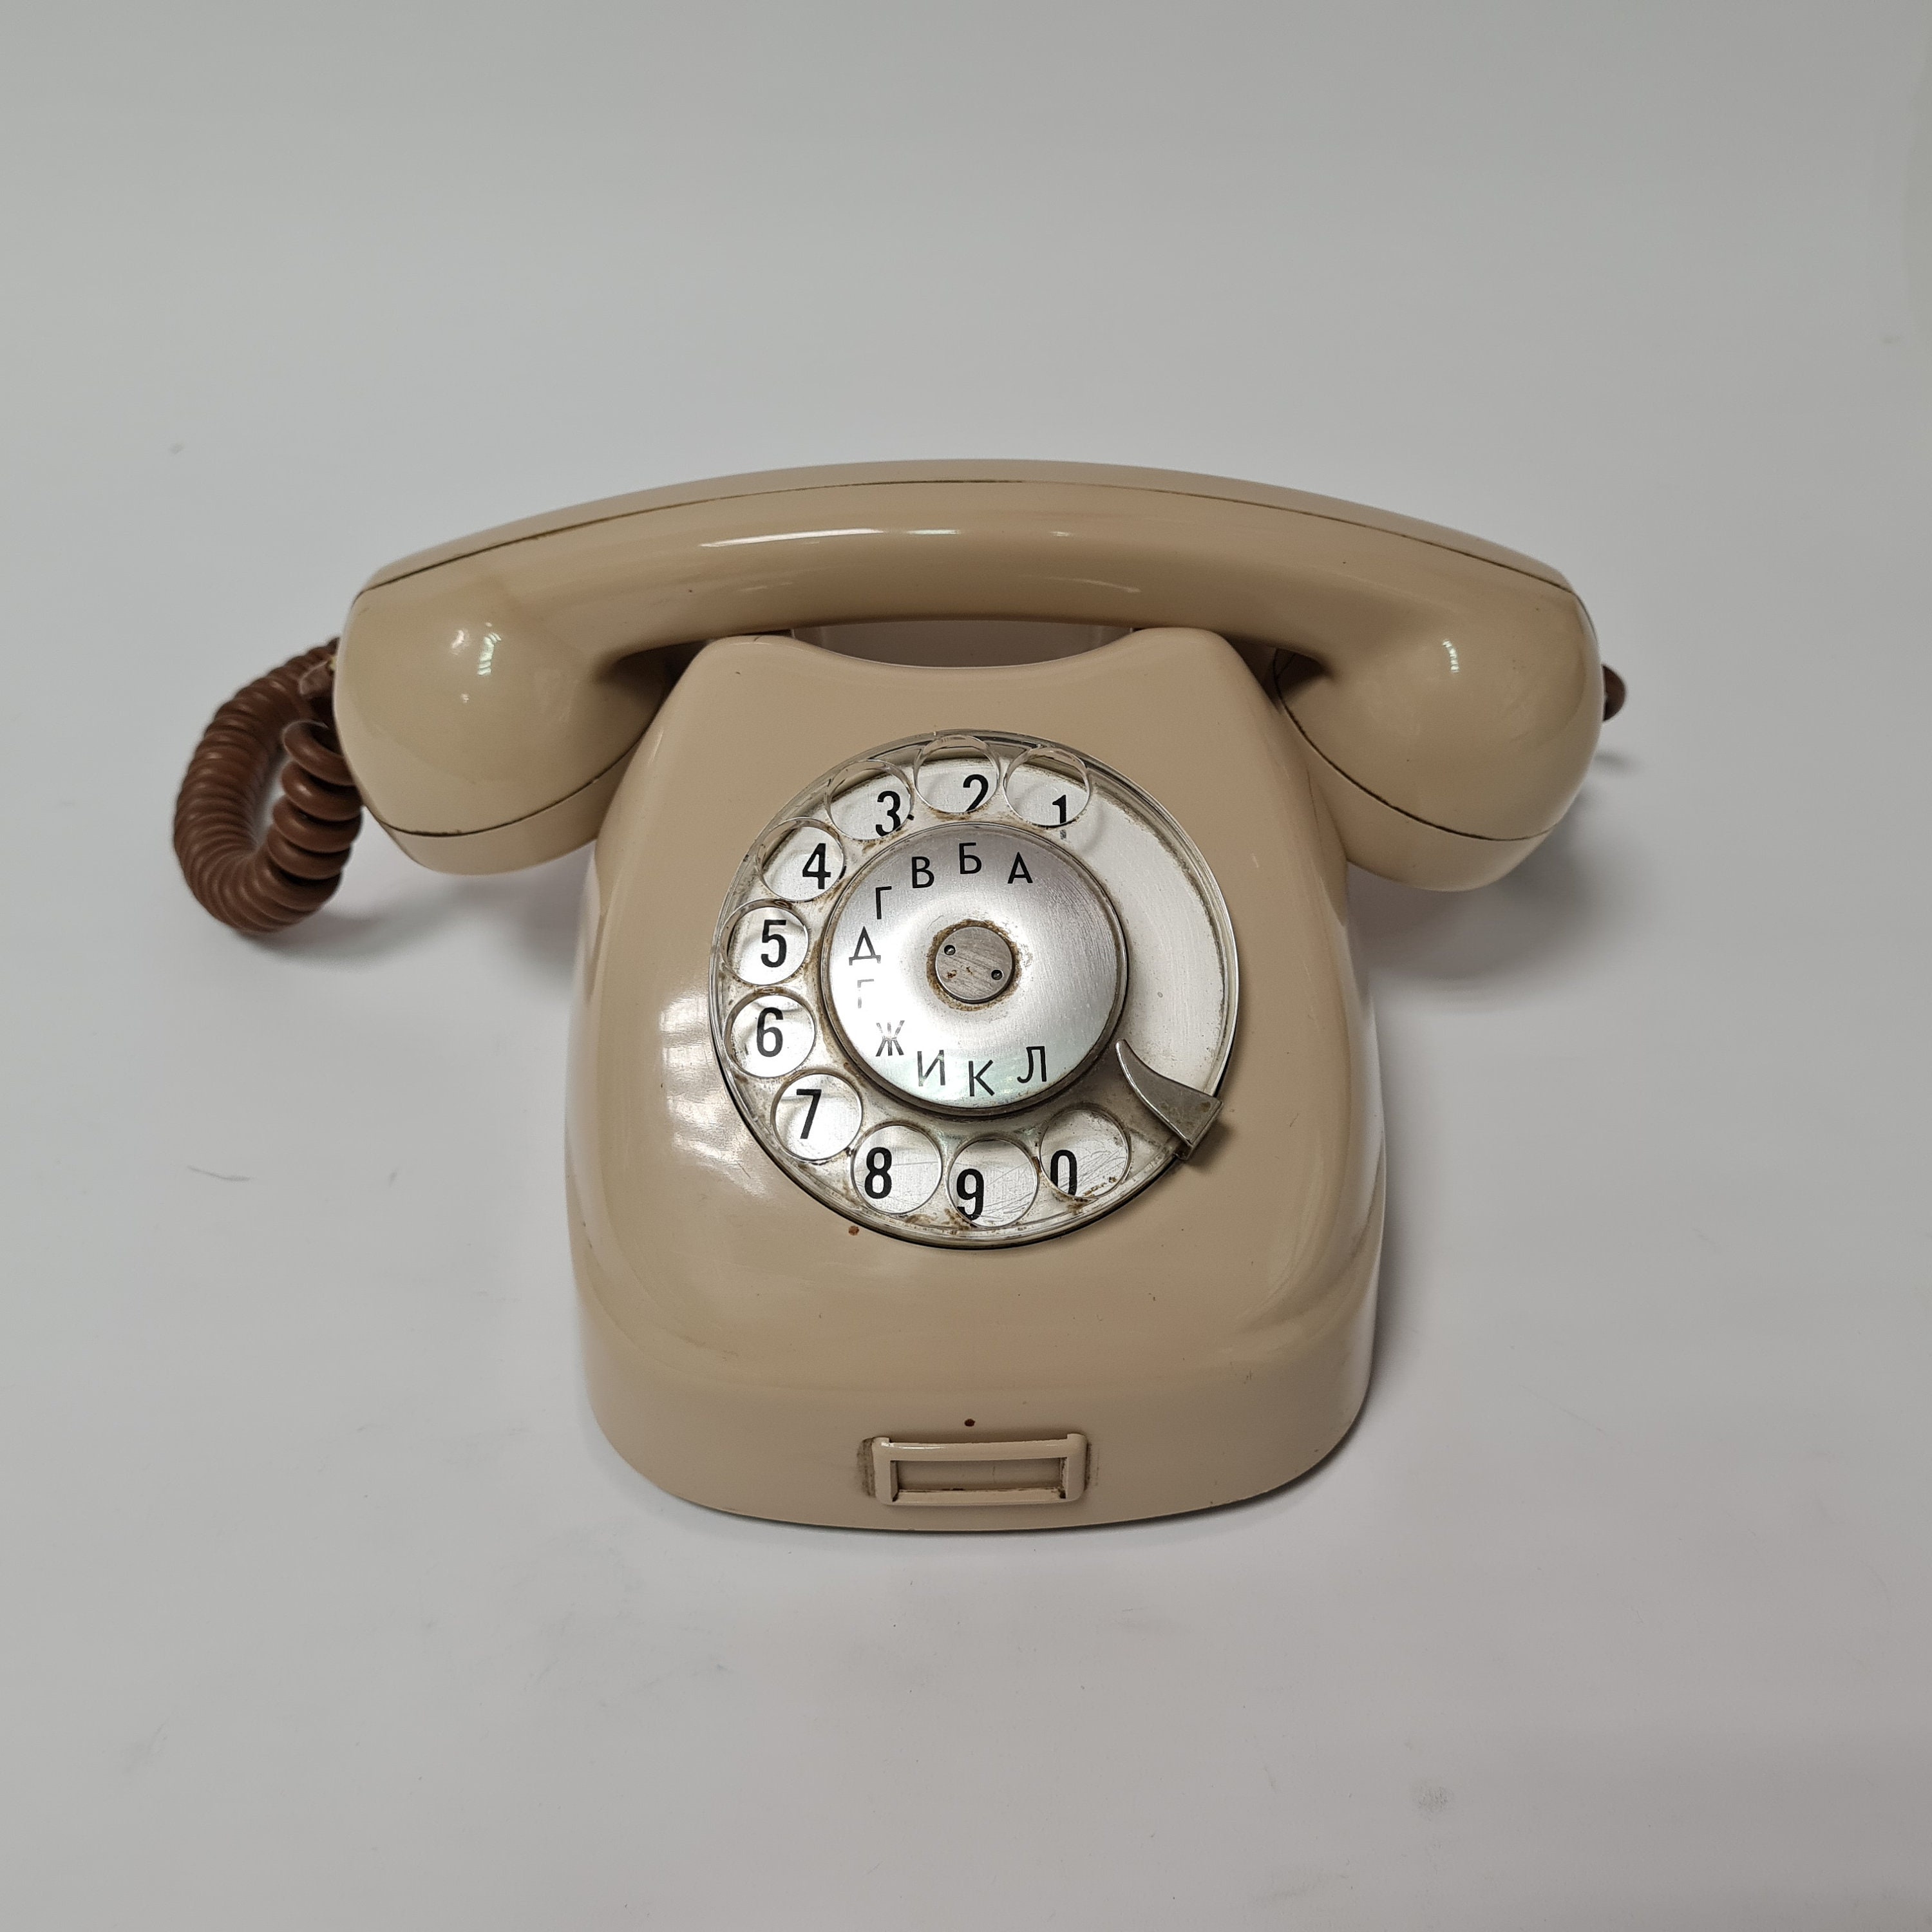 Retro Landline Telephone, Sentno 1960's Vintage Corded Dial Phone Classic  Old Fashion Telephones Wired Desk Telephone for Office and Home (White)